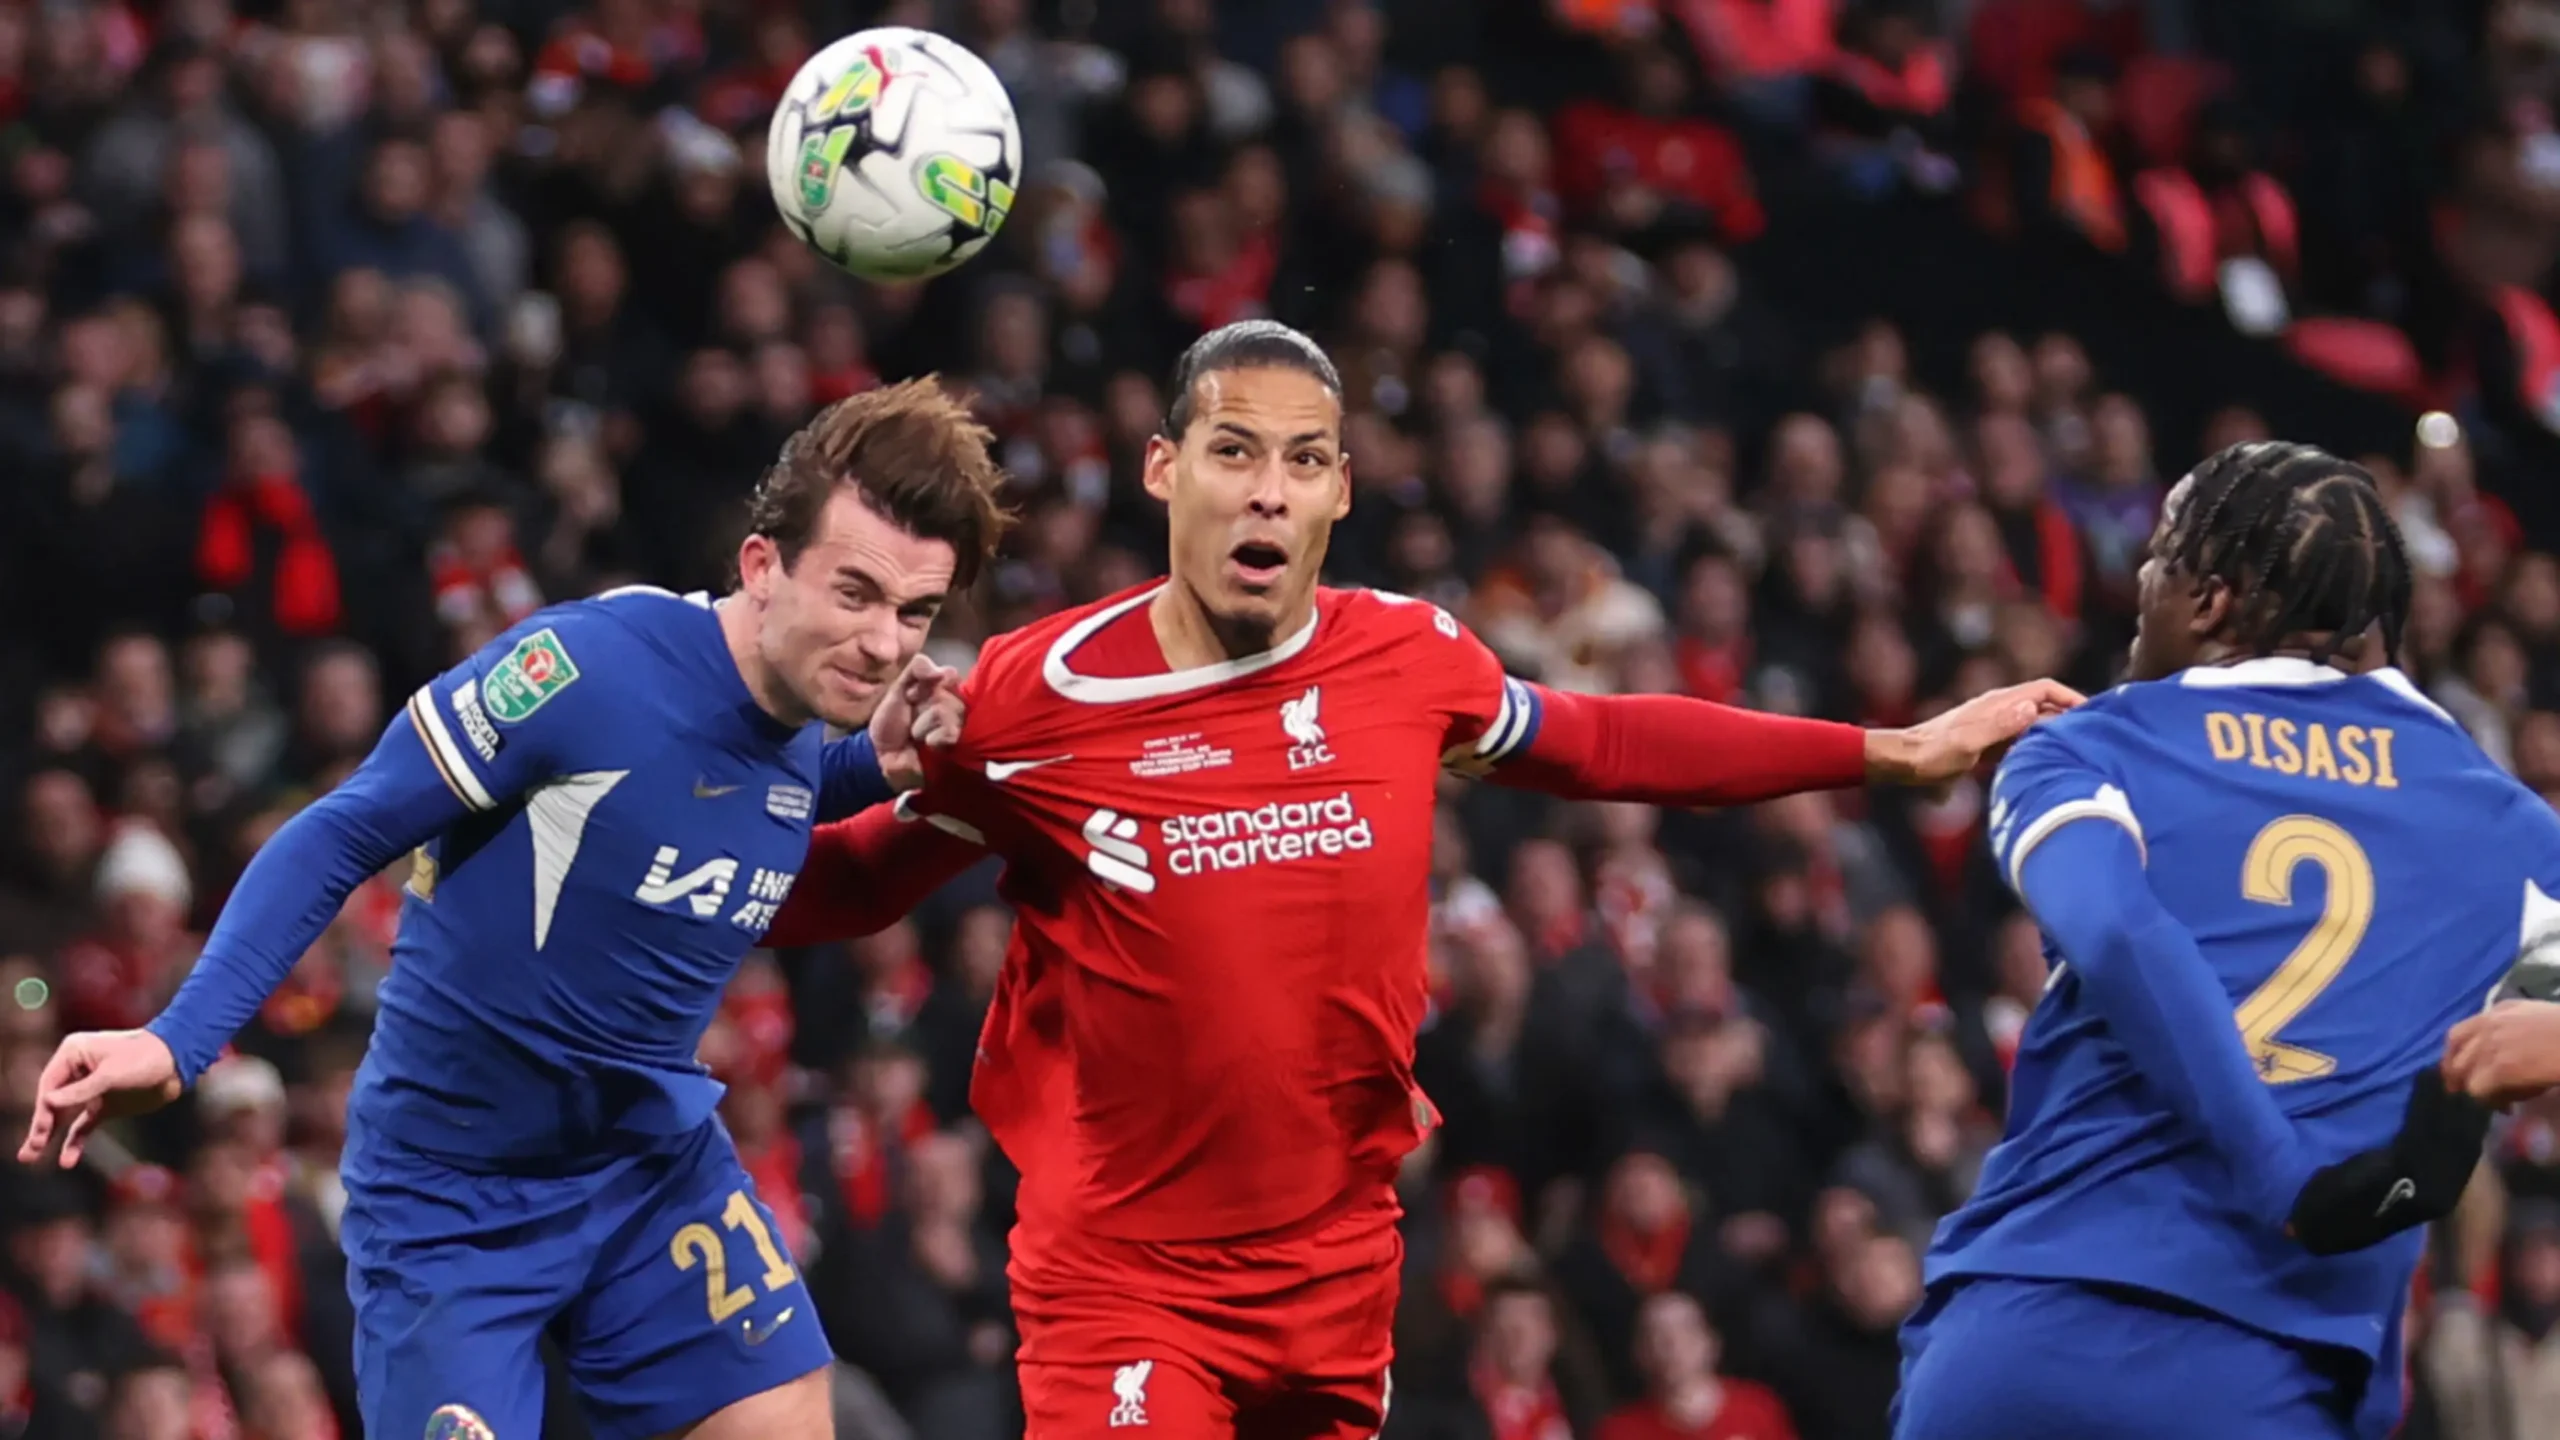 Liverpool's Emphatic Carabao Cup Triumph Over Chelsea: A Blend of Drama, Disappointment, and Delight